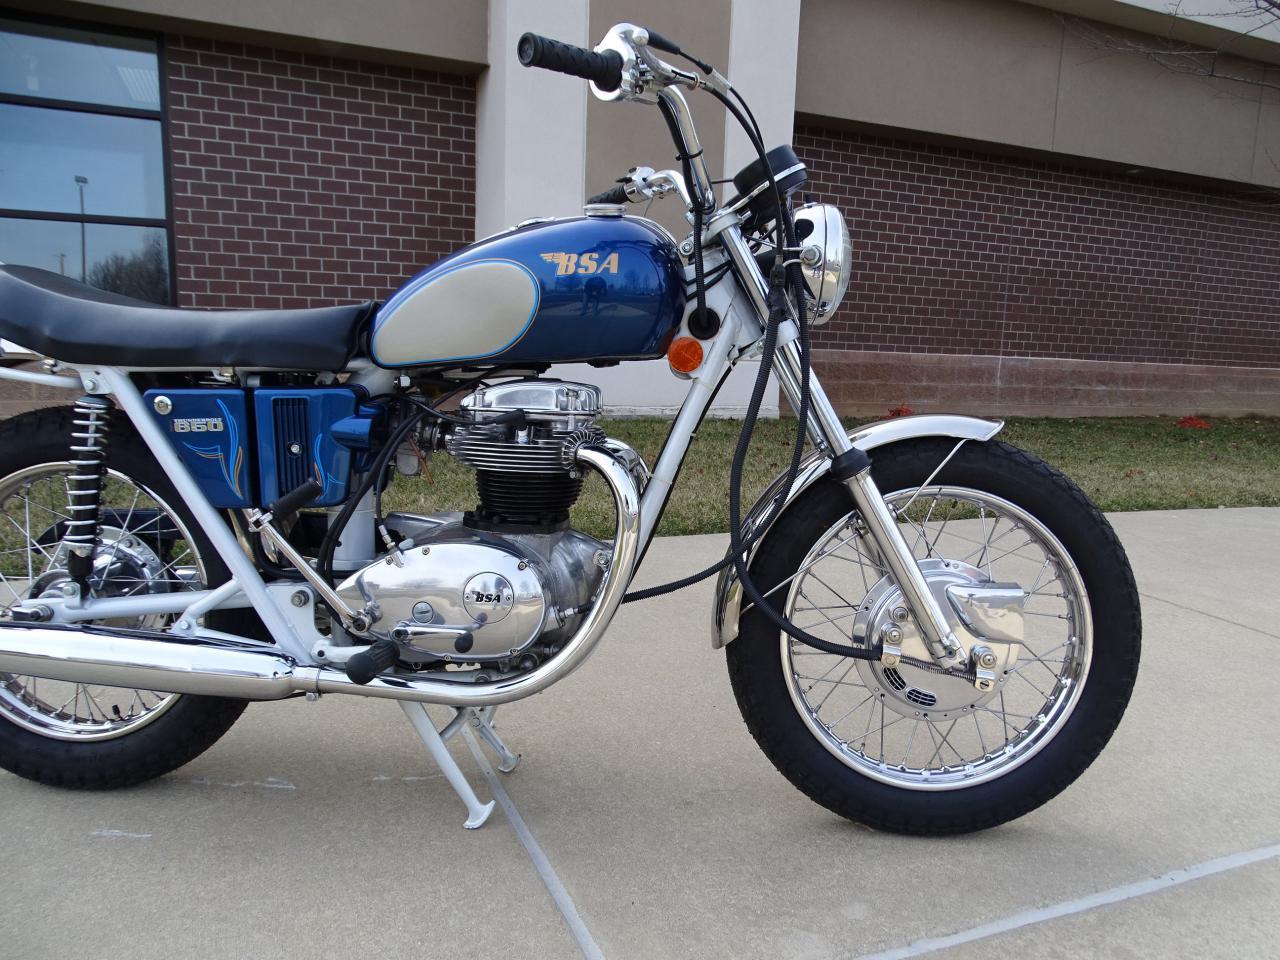 1971 BSA Motorcycle for sale in O'Fallon, IL – photo 22